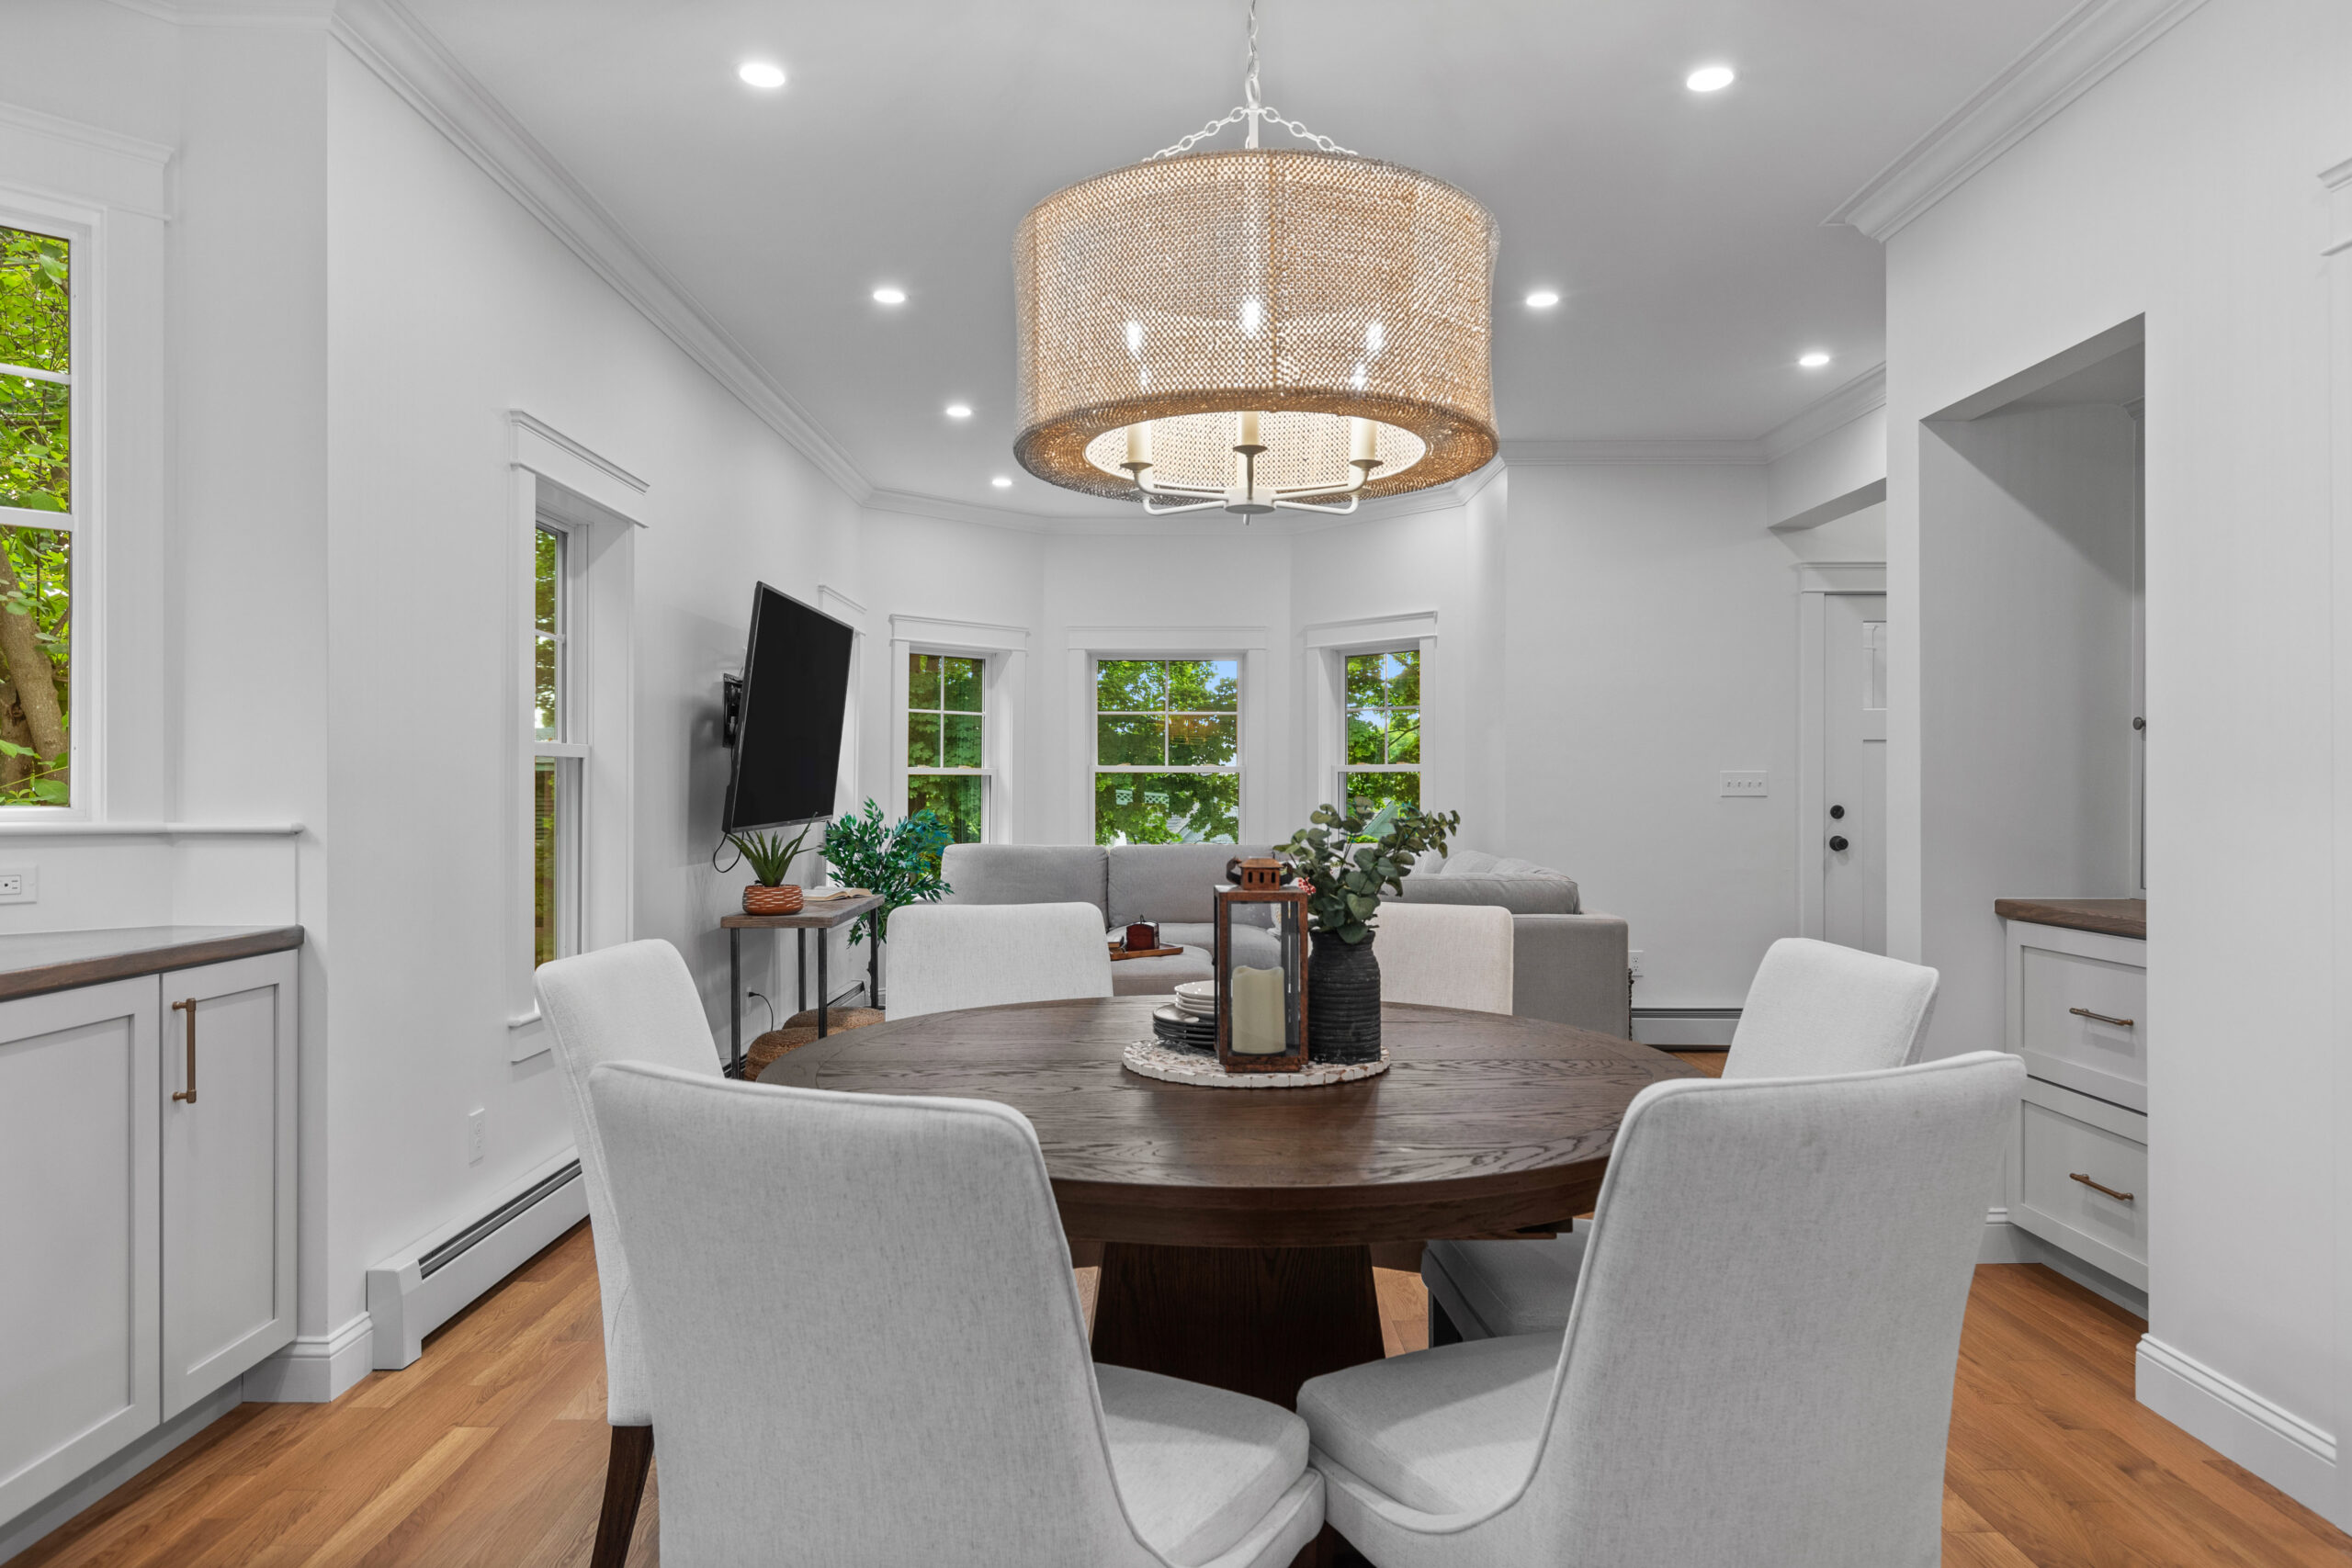 Image of a beautifully renovated living and dining room in a vintage New England home. The space features custom cabinetry with sleek wooden countertops and modern hardware. White walls and large windows allow natural light to brighten the room, showcasing the new hardwood flooring and contemporary decor, creating a harmonious blend of classic and modern design.